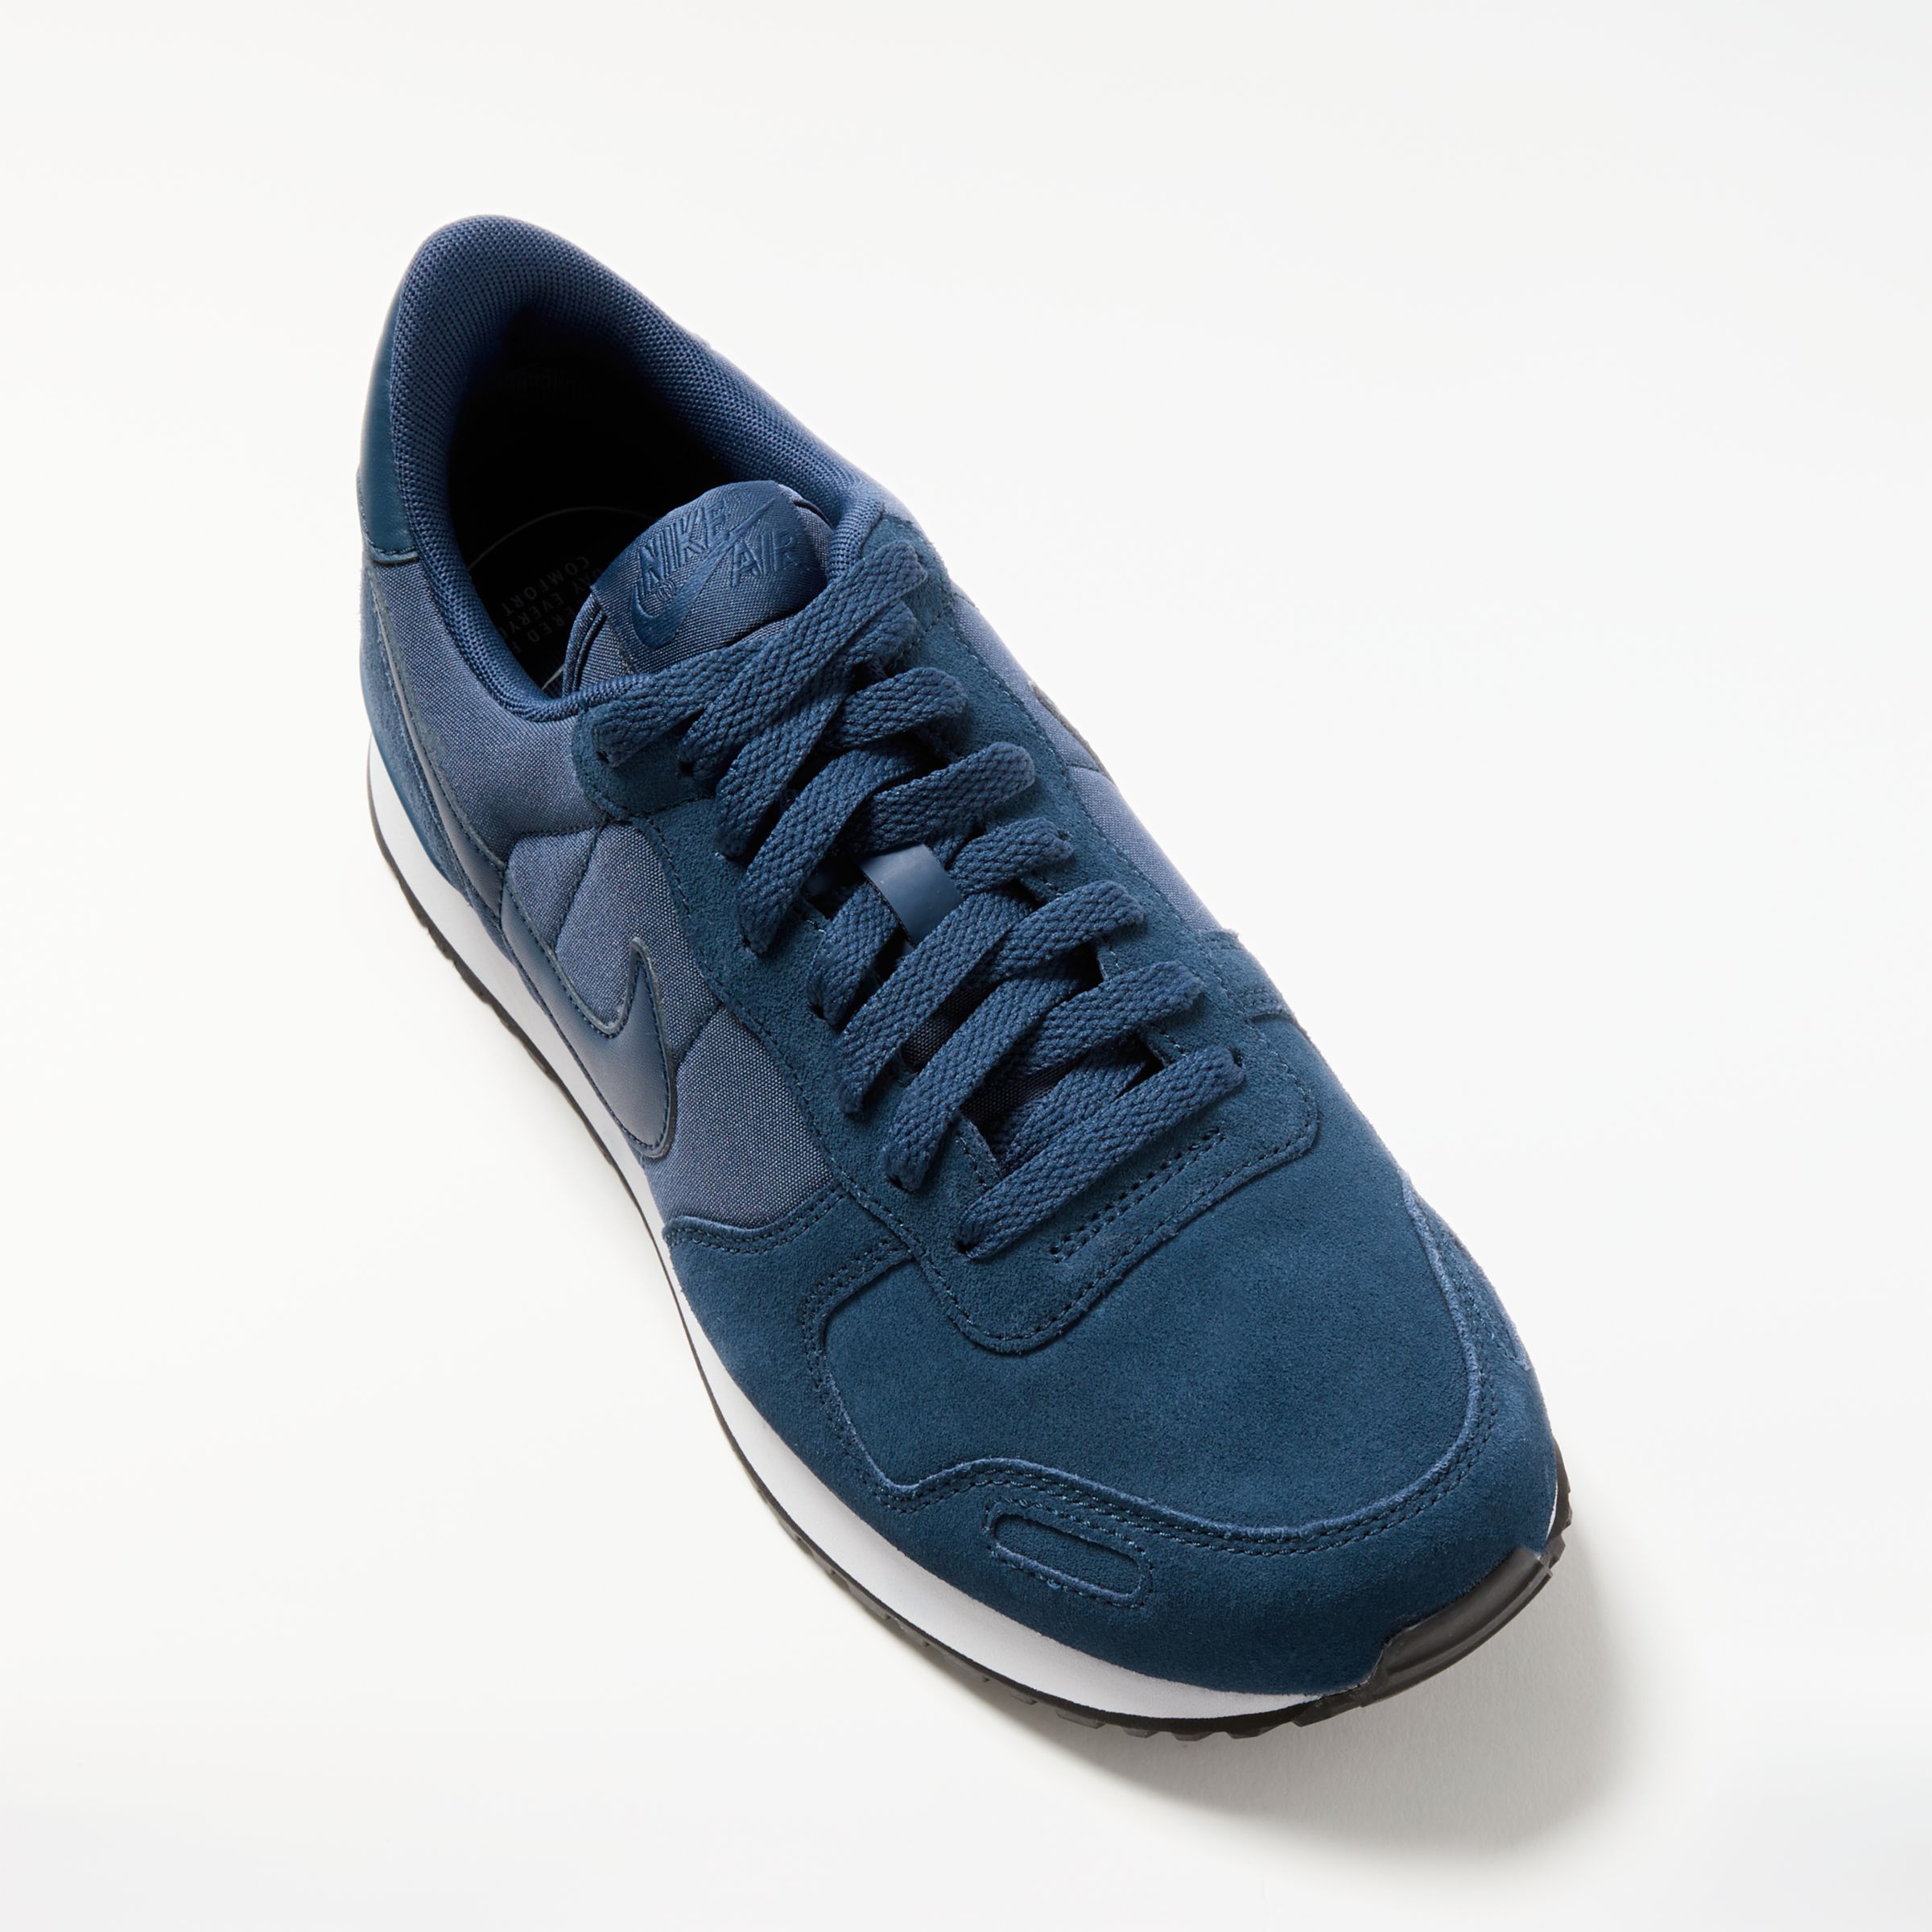 mens nike trainers navy